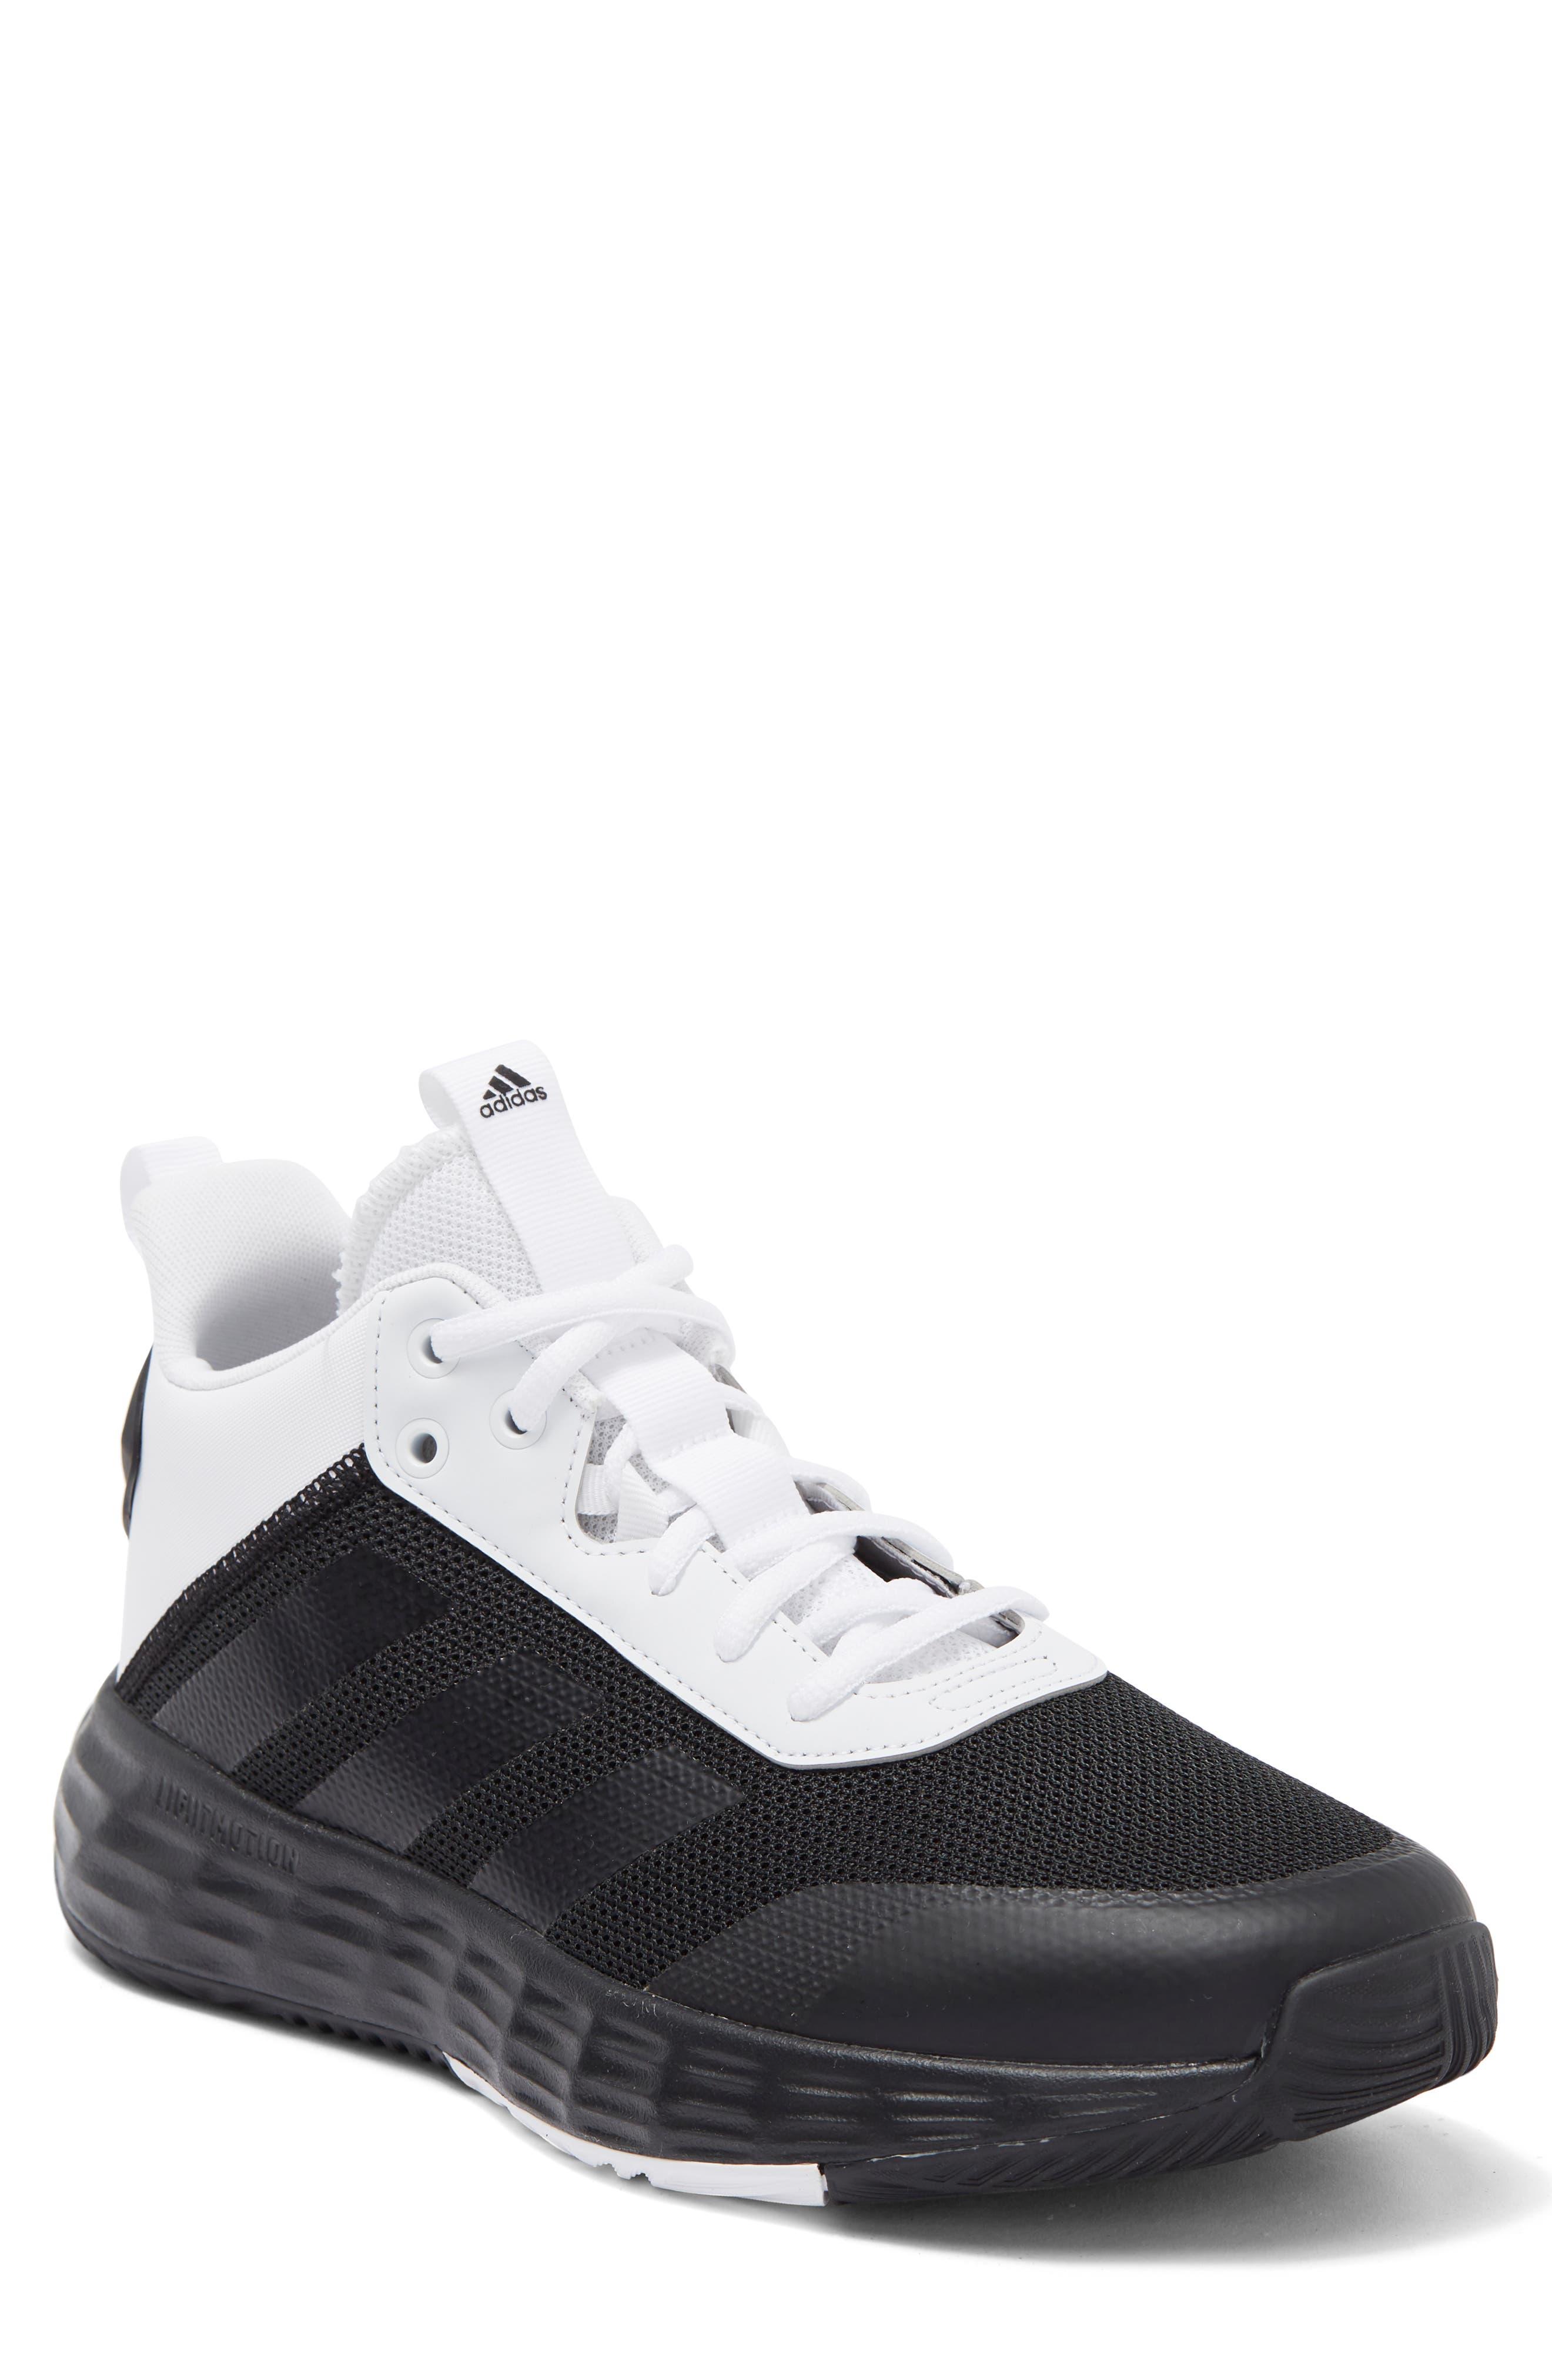 adidas Own The Game 2.0 Basketball Shoes Black